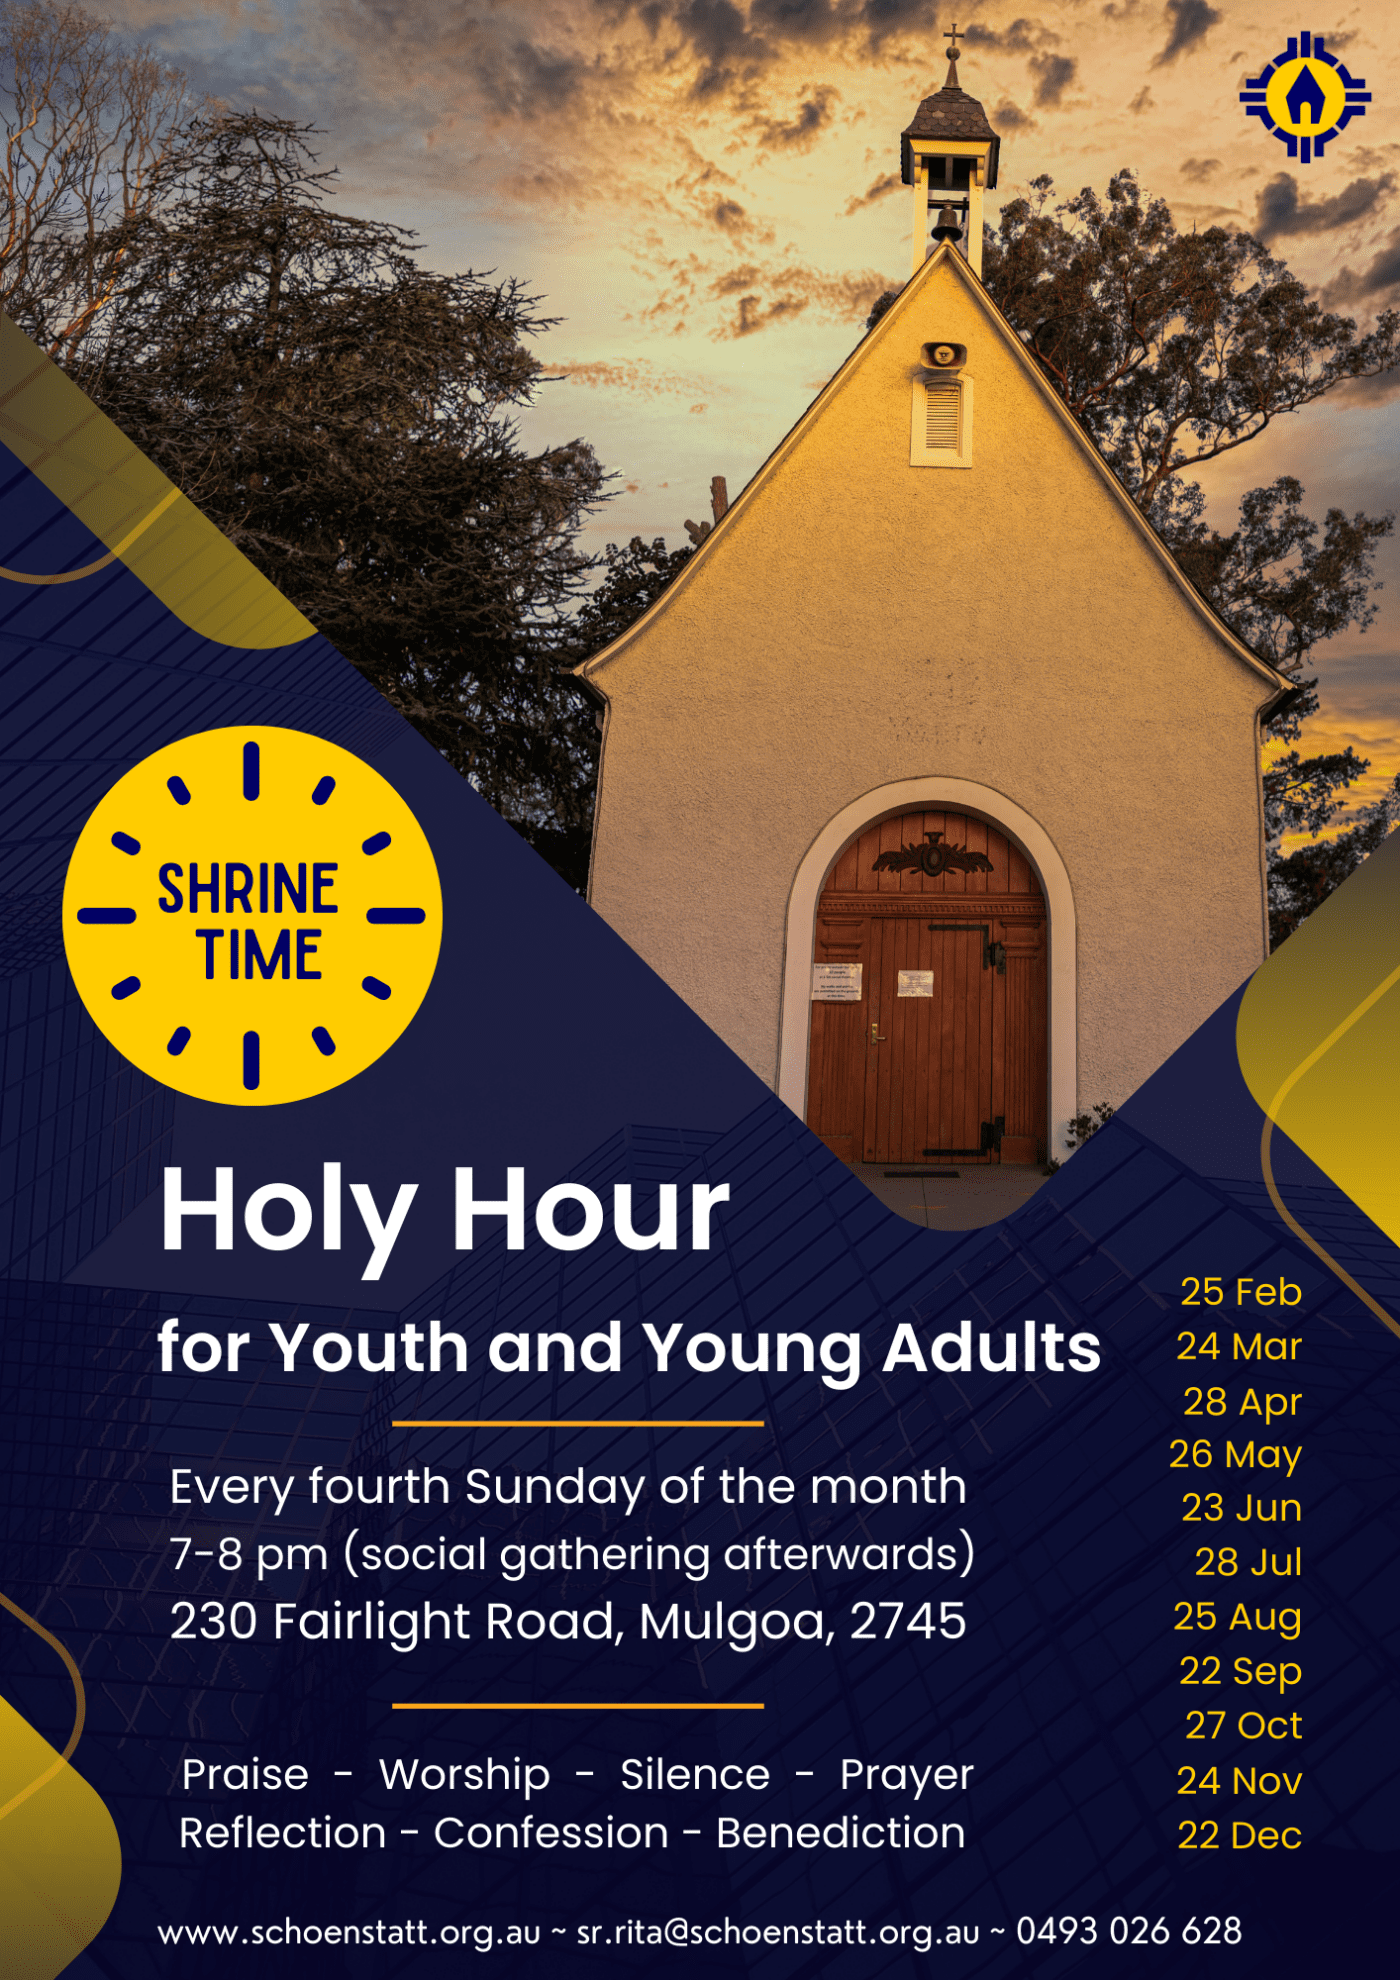 Mount Schoenstatt Shrine Time Holy Hour for Youth and Young Adults (24 March)